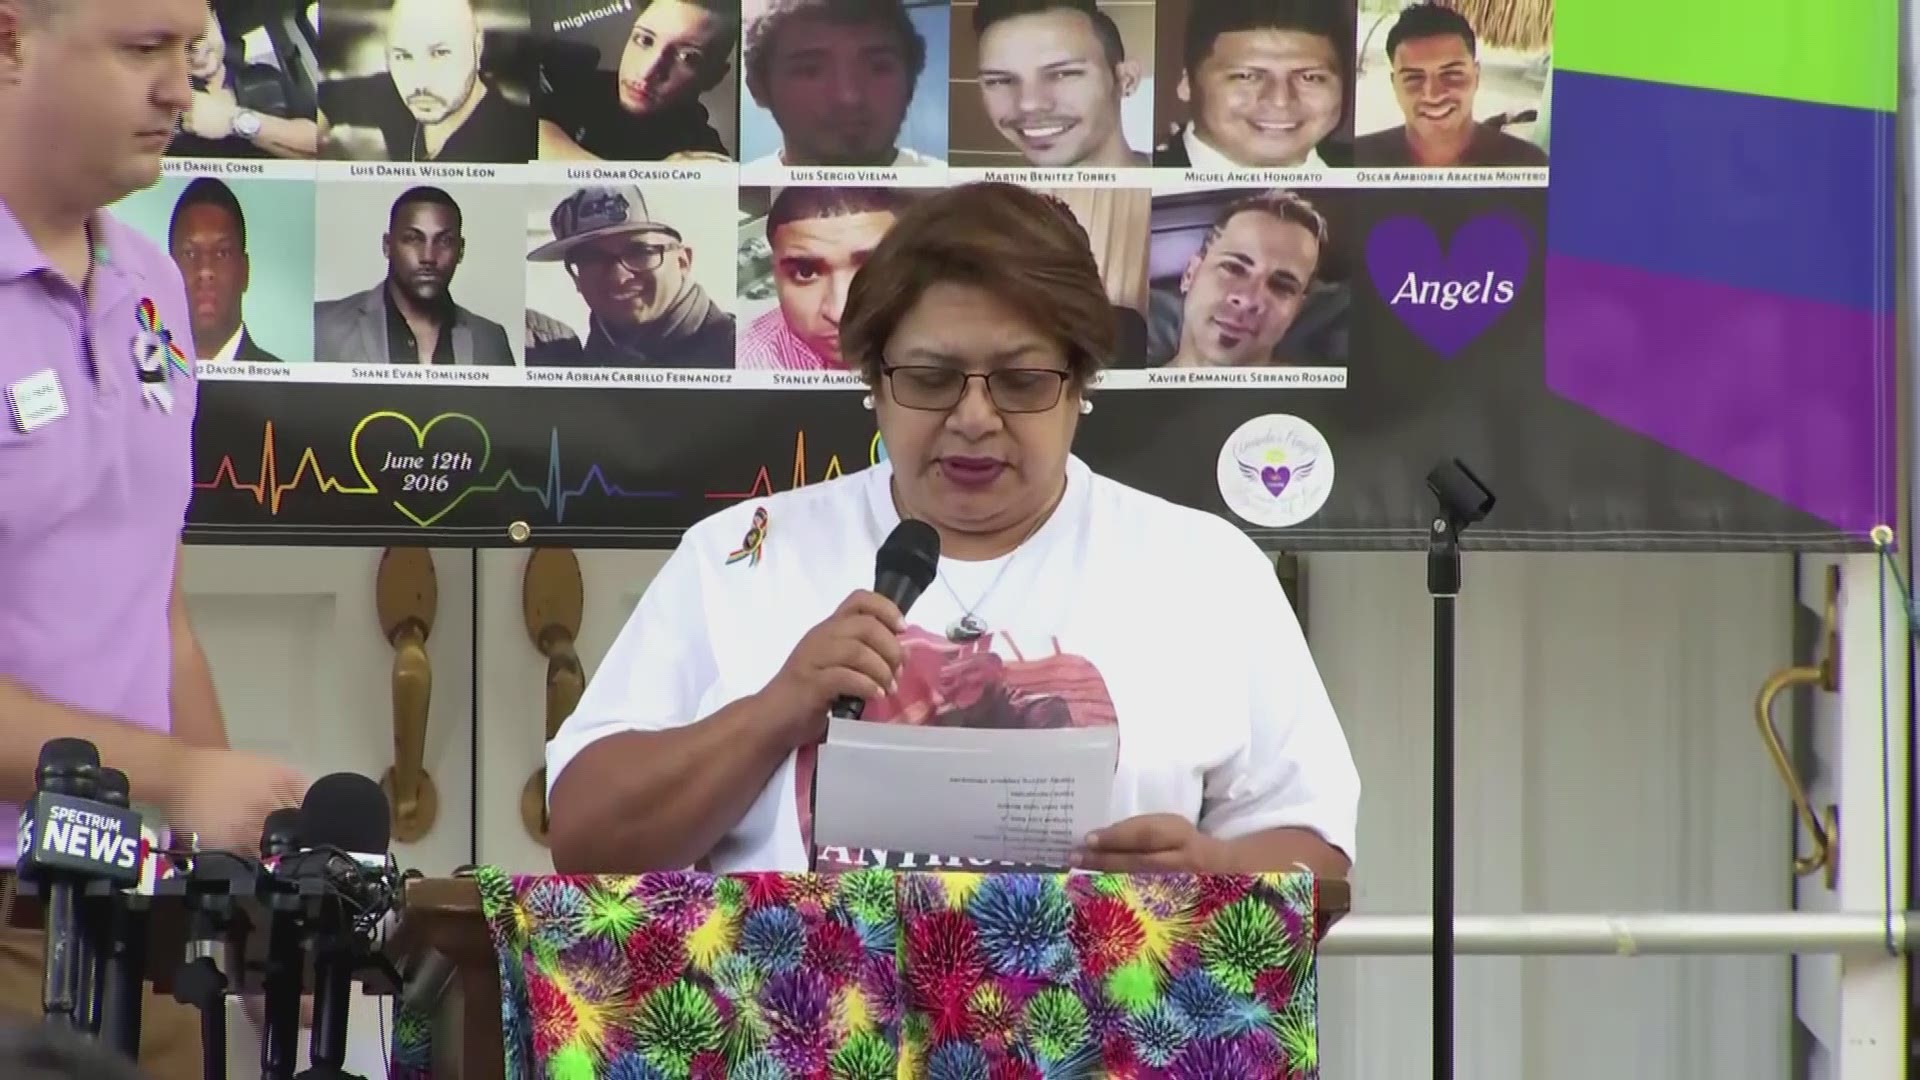 Five years after a gunman killed 49 people at the former Pulse nightclub, the names of those killed were read aloud.